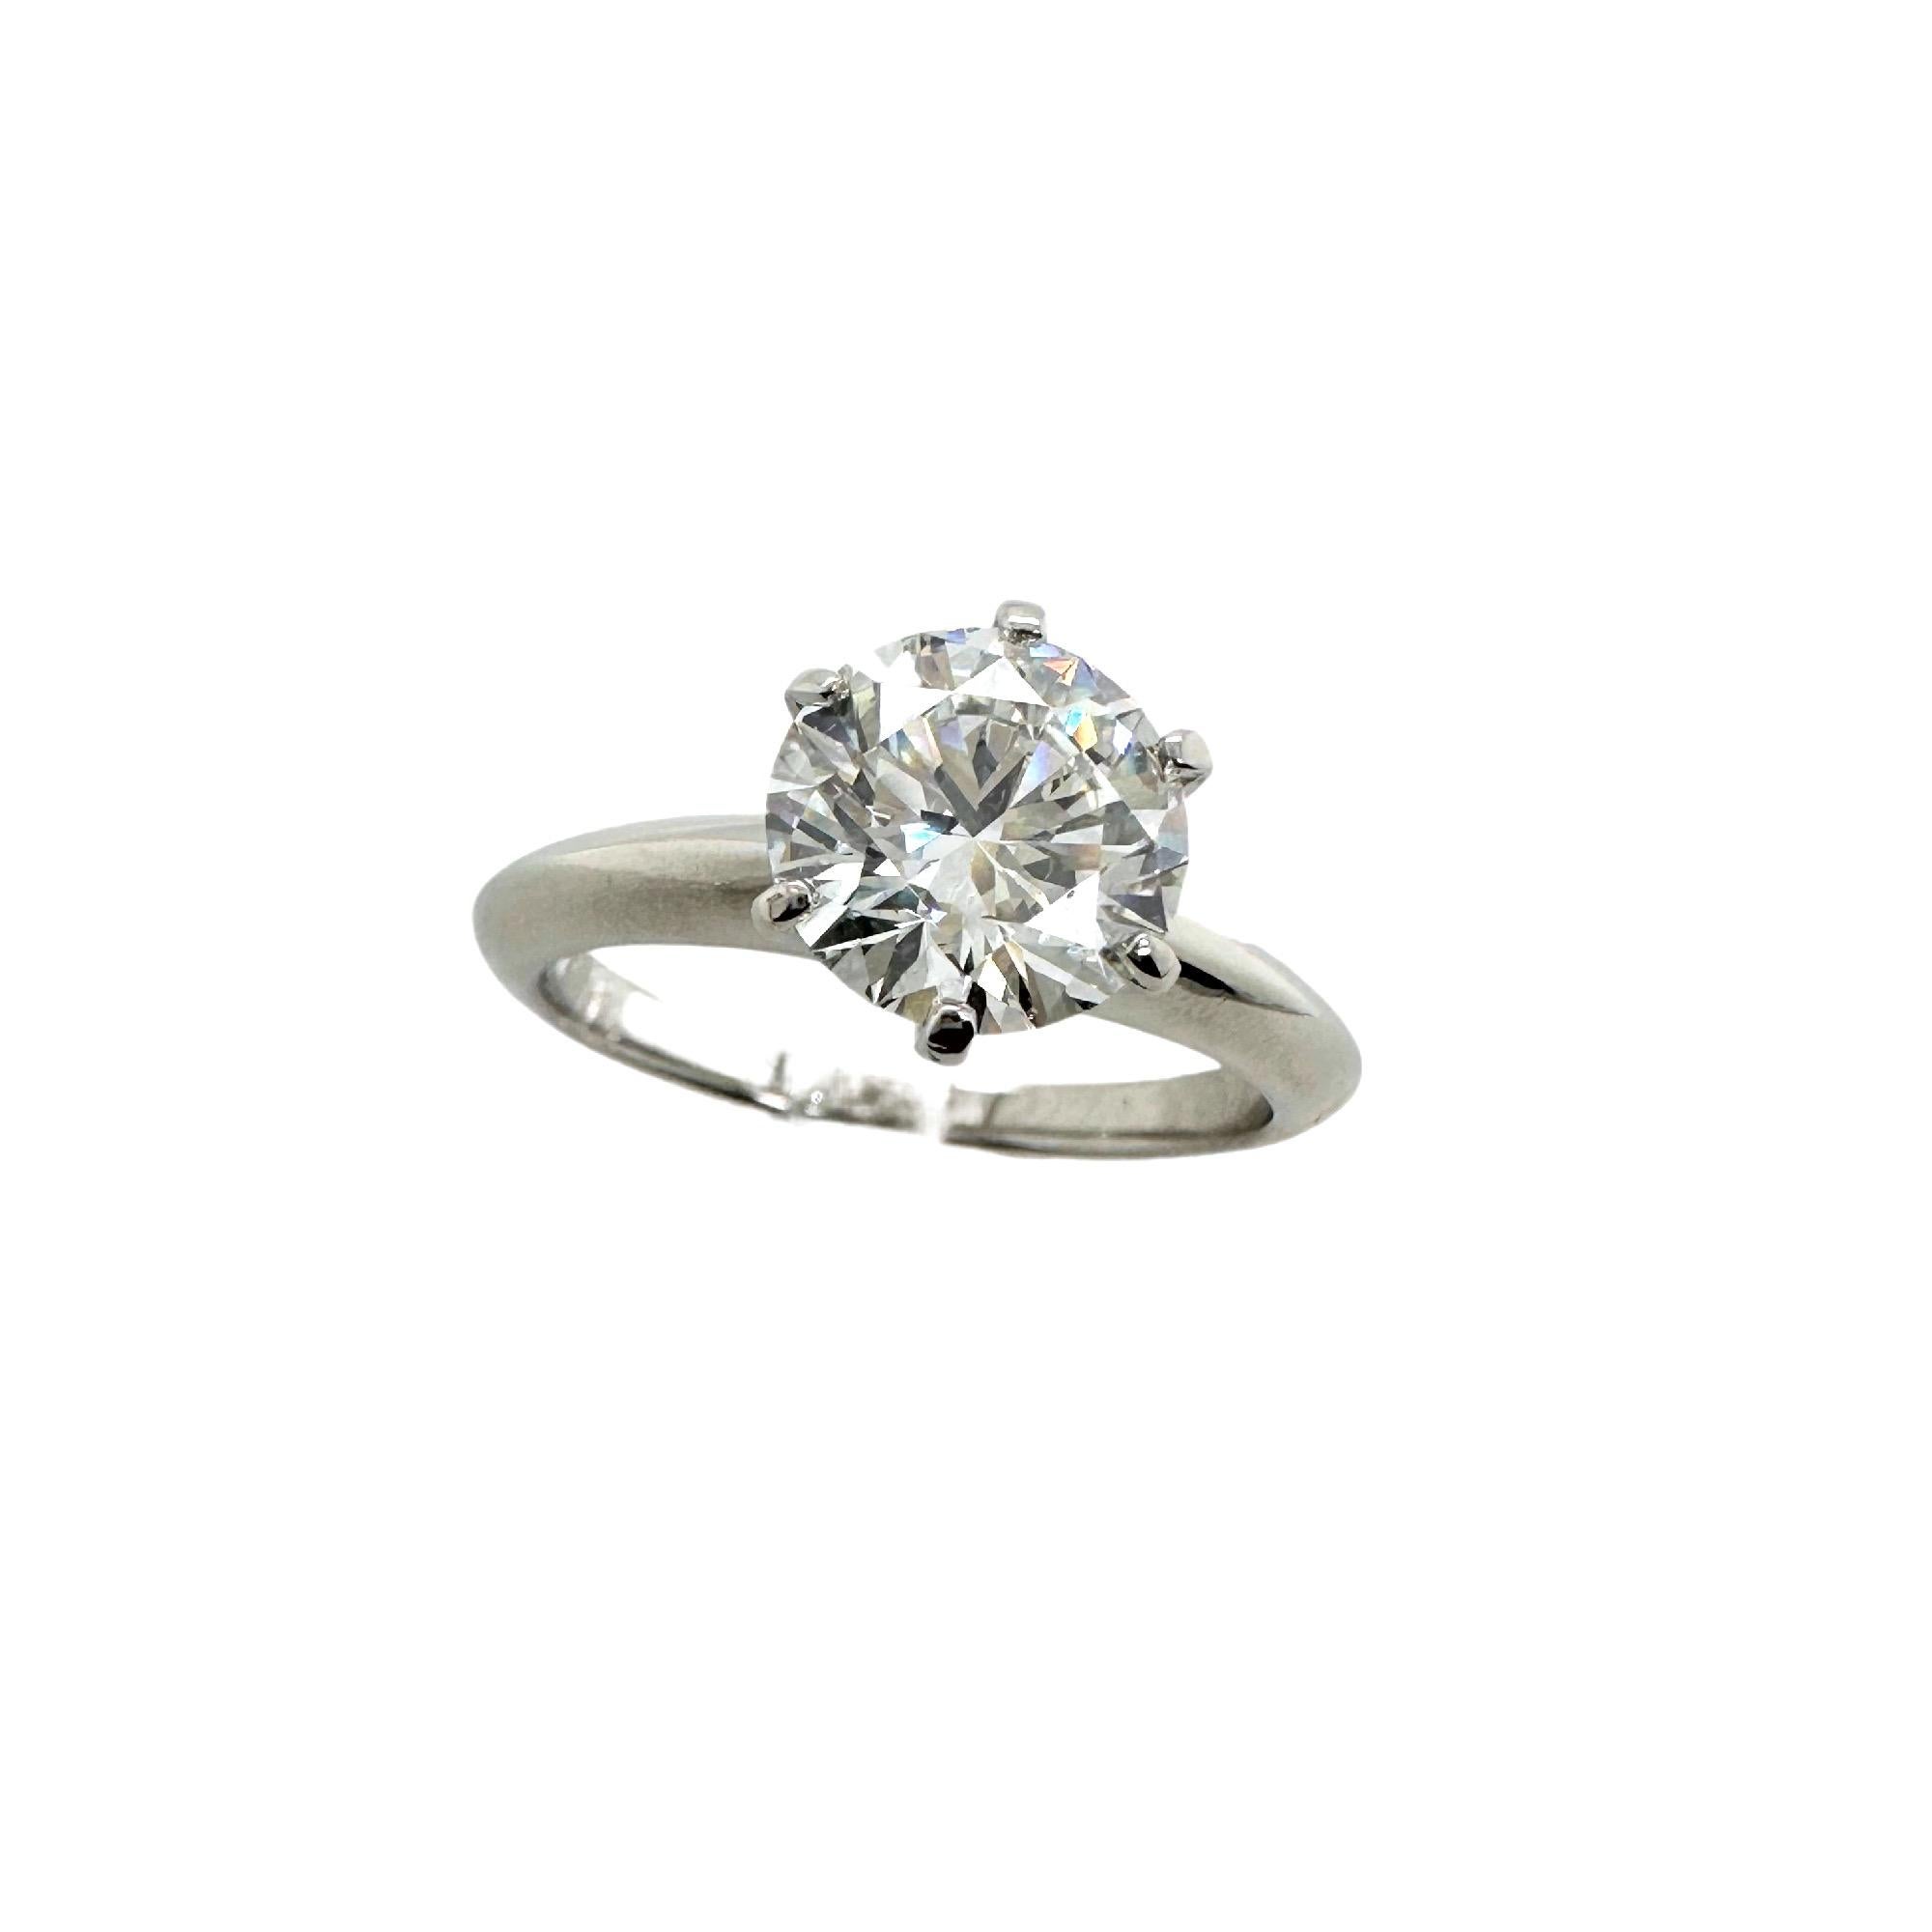 Tiffany & Co Round Diamond Solitaire 1.72 cts H VVS2 Plat Engagement Ring Papers For Sale 3